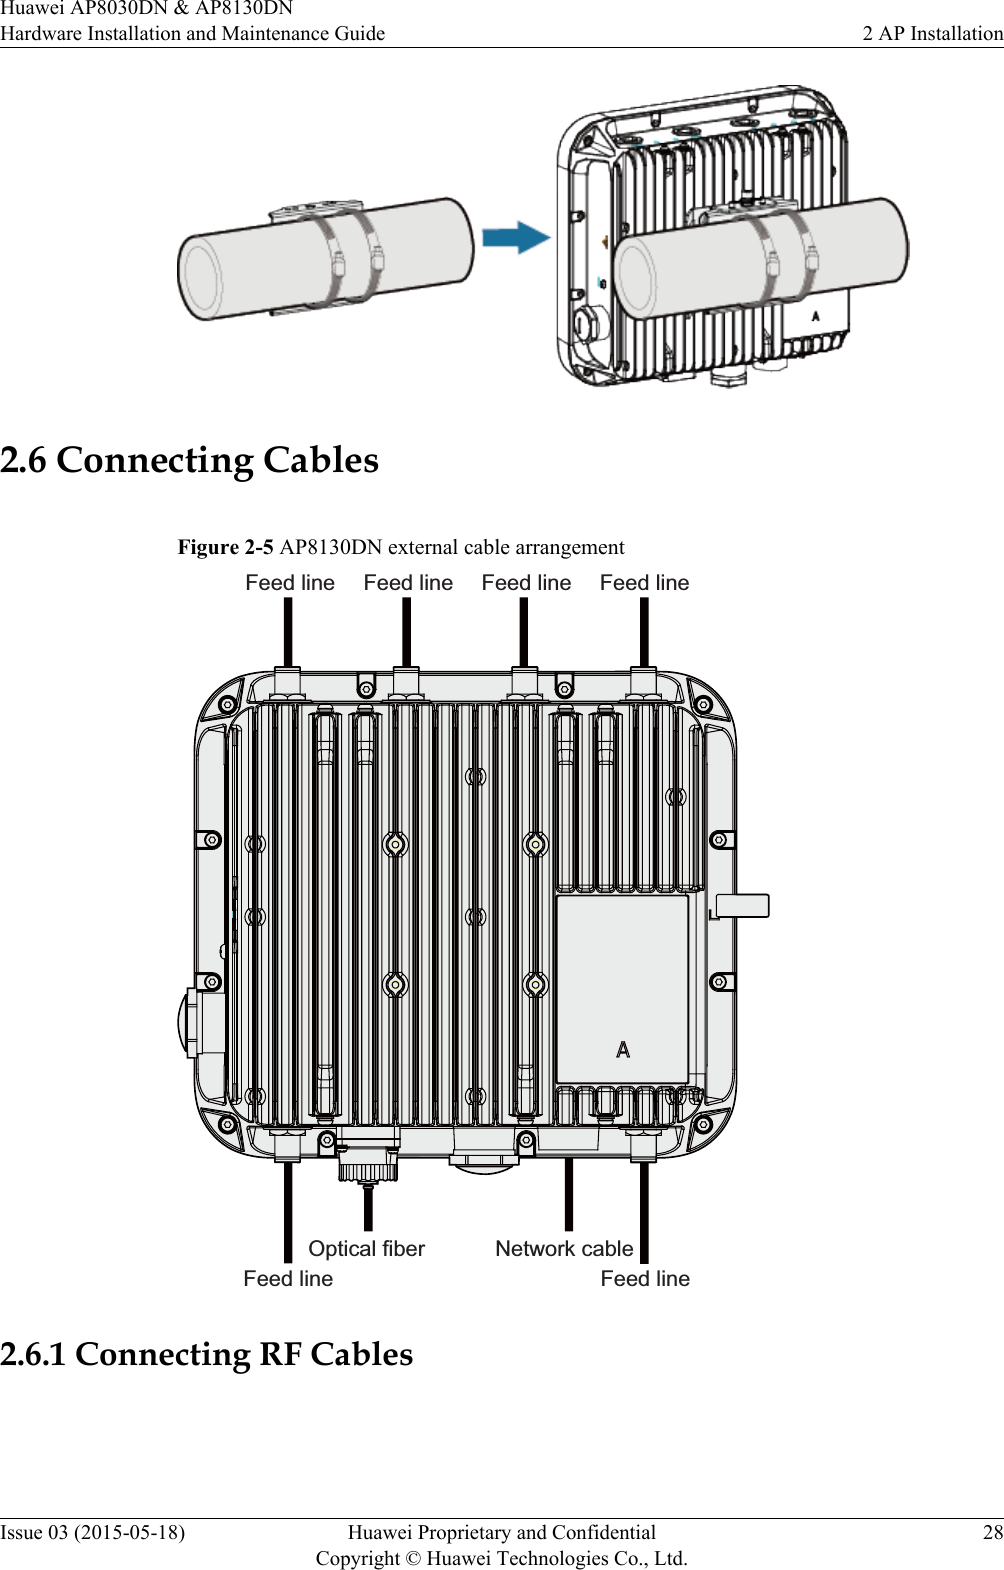 2.6 Connecting CablesFigure 2-5 AP8130DN external cable arrangementFeed line Feed line Feed line Feed lineFeed line Feed lineOptical fiber Network cable2.6.1 Connecting RF CablesHuawei AP8030DN &amp; AP8130DNHardware Installation and Maintenance Guide 2 AP InstallationIssue 03 (2015-05-18) Huawei Proprietary and ConfidentialCopyright © Huawei Technologies Co., Ltd.28